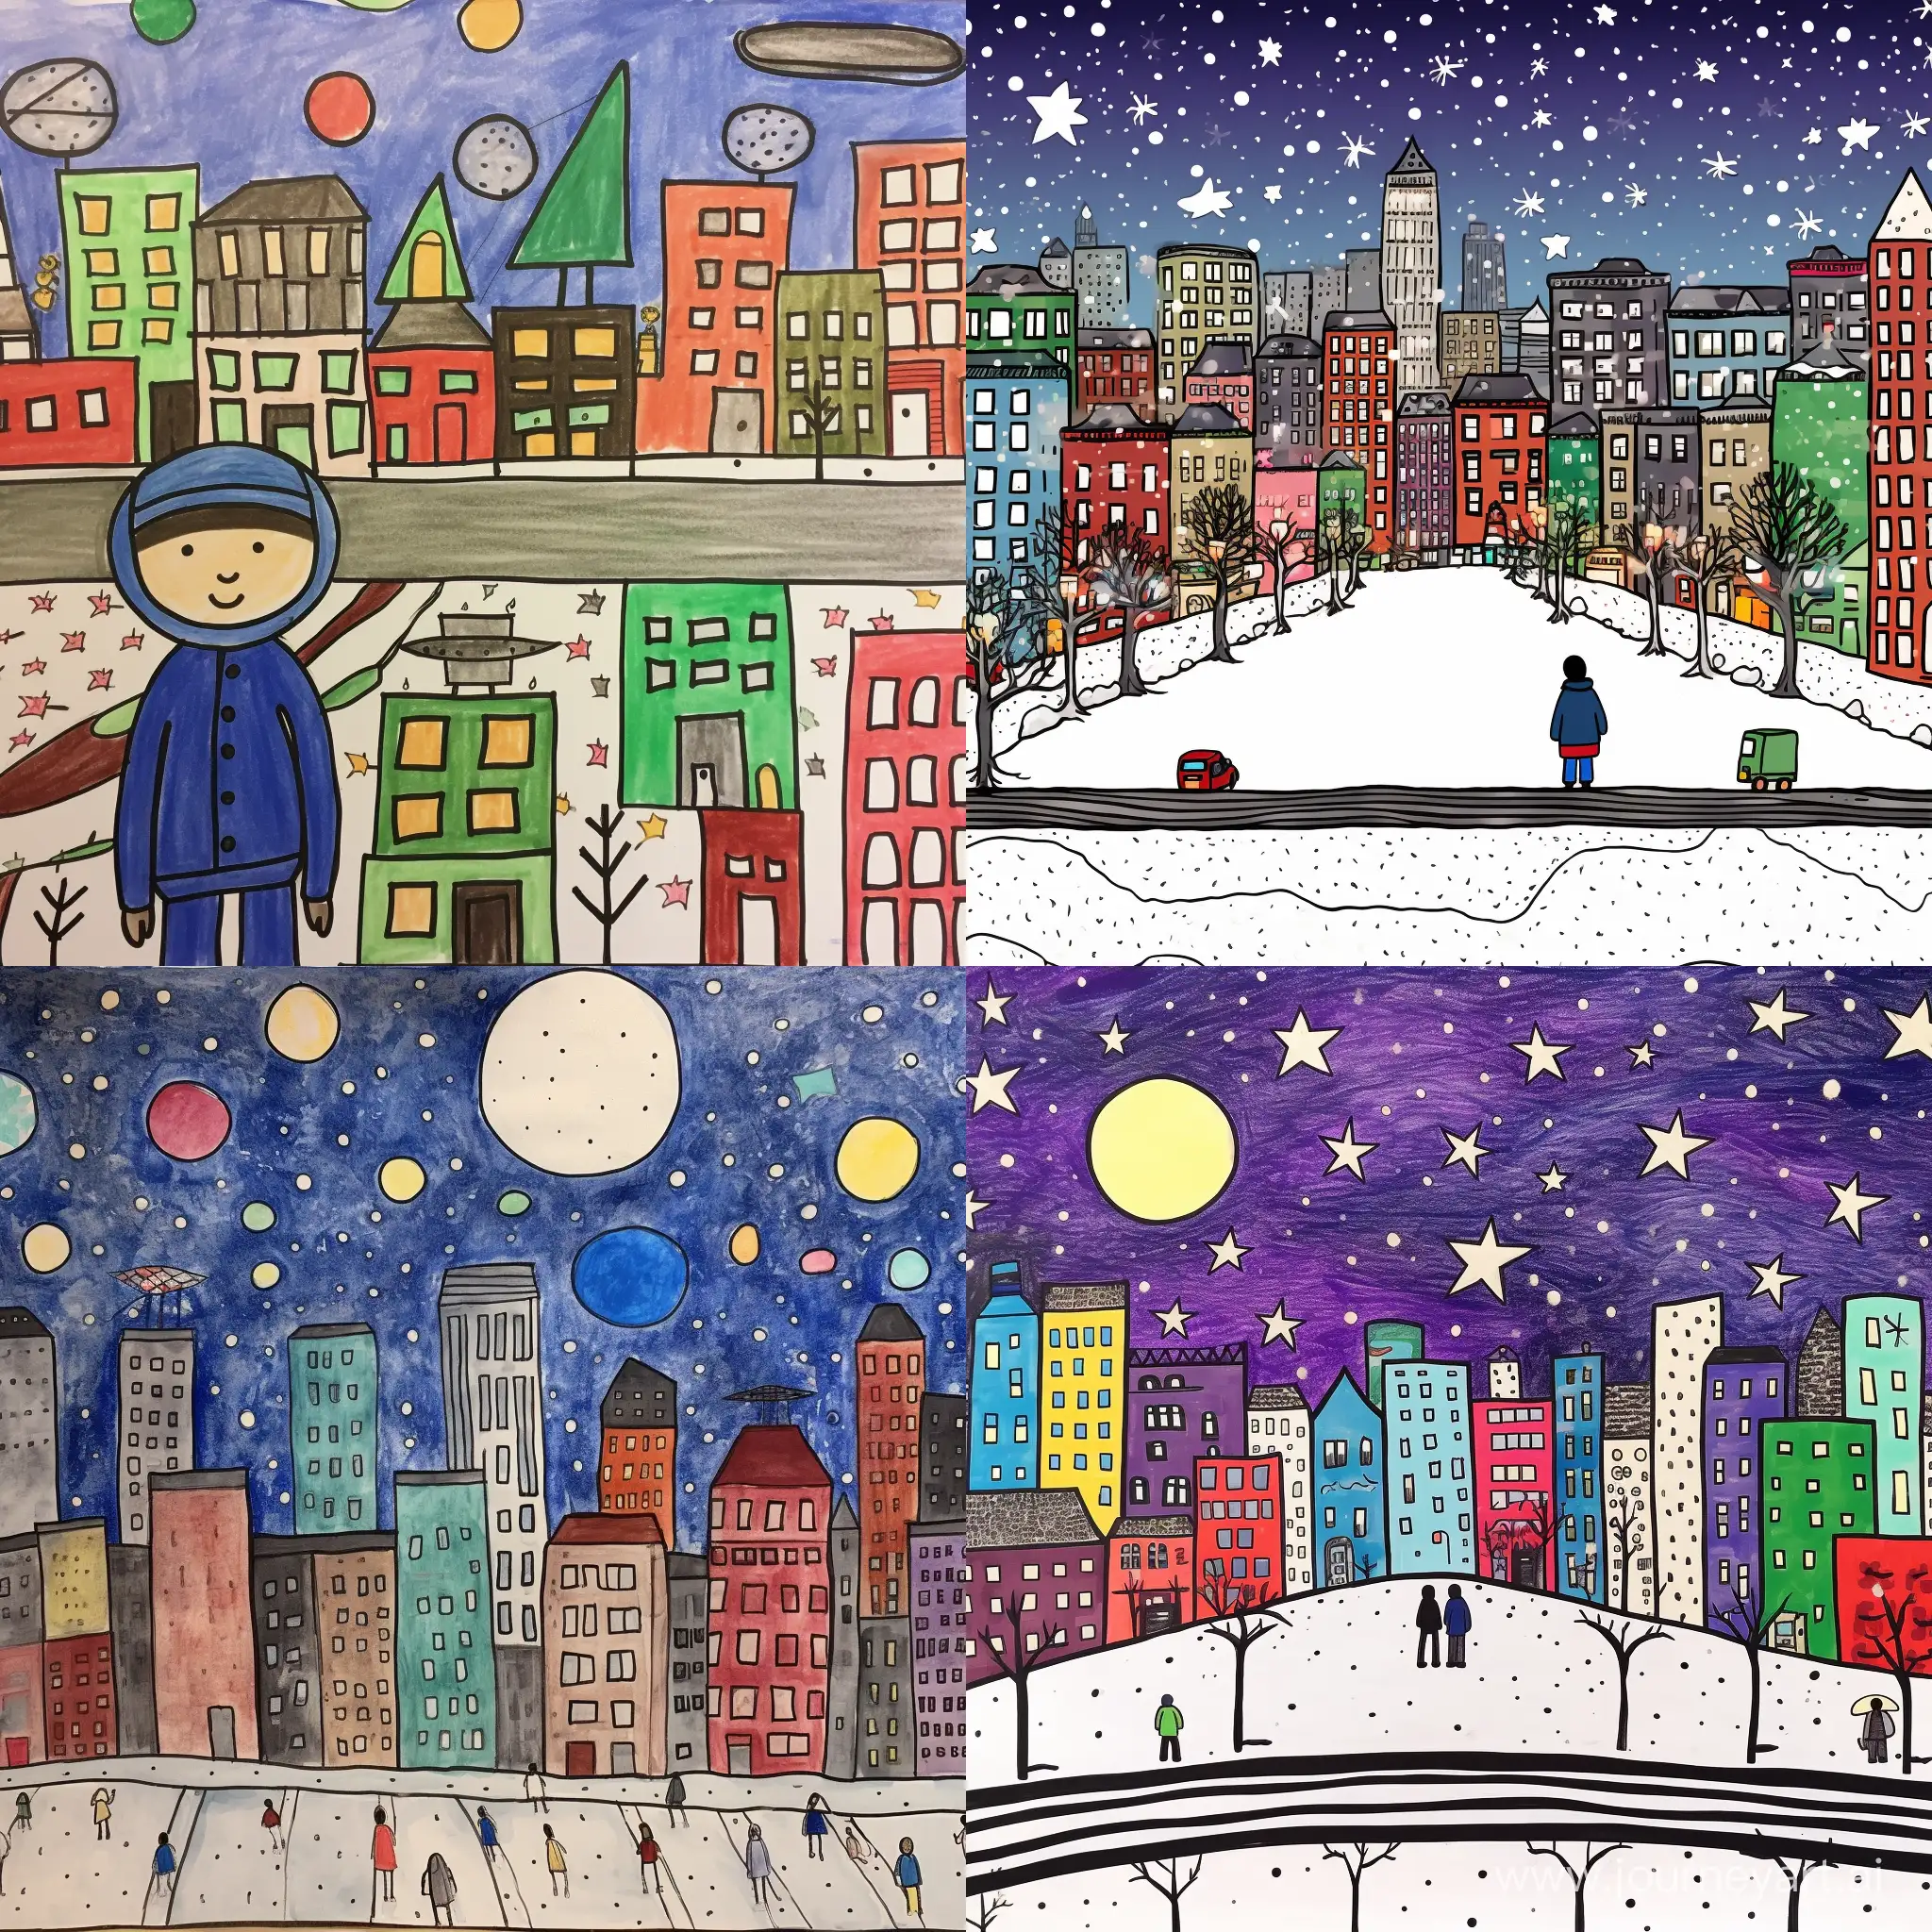  Create a 9:16 horizontal drawing depicting a winter cityscape in cool colors. The city should be covered with snow, with buses and bus stops covered with snow. Tired and scared people are wandering the streets. The focus of the image is on a little boy who has raised his head and is looking up. A fantastic spaceship hovers over the city, standing out in the winter sky. The ship should be made with bright accents contrasting with the cold winter atmosphere. Elements of surrealism and mysticism should be included in the overall composition, emphasizing the strangeness and fantasticism of the scene.